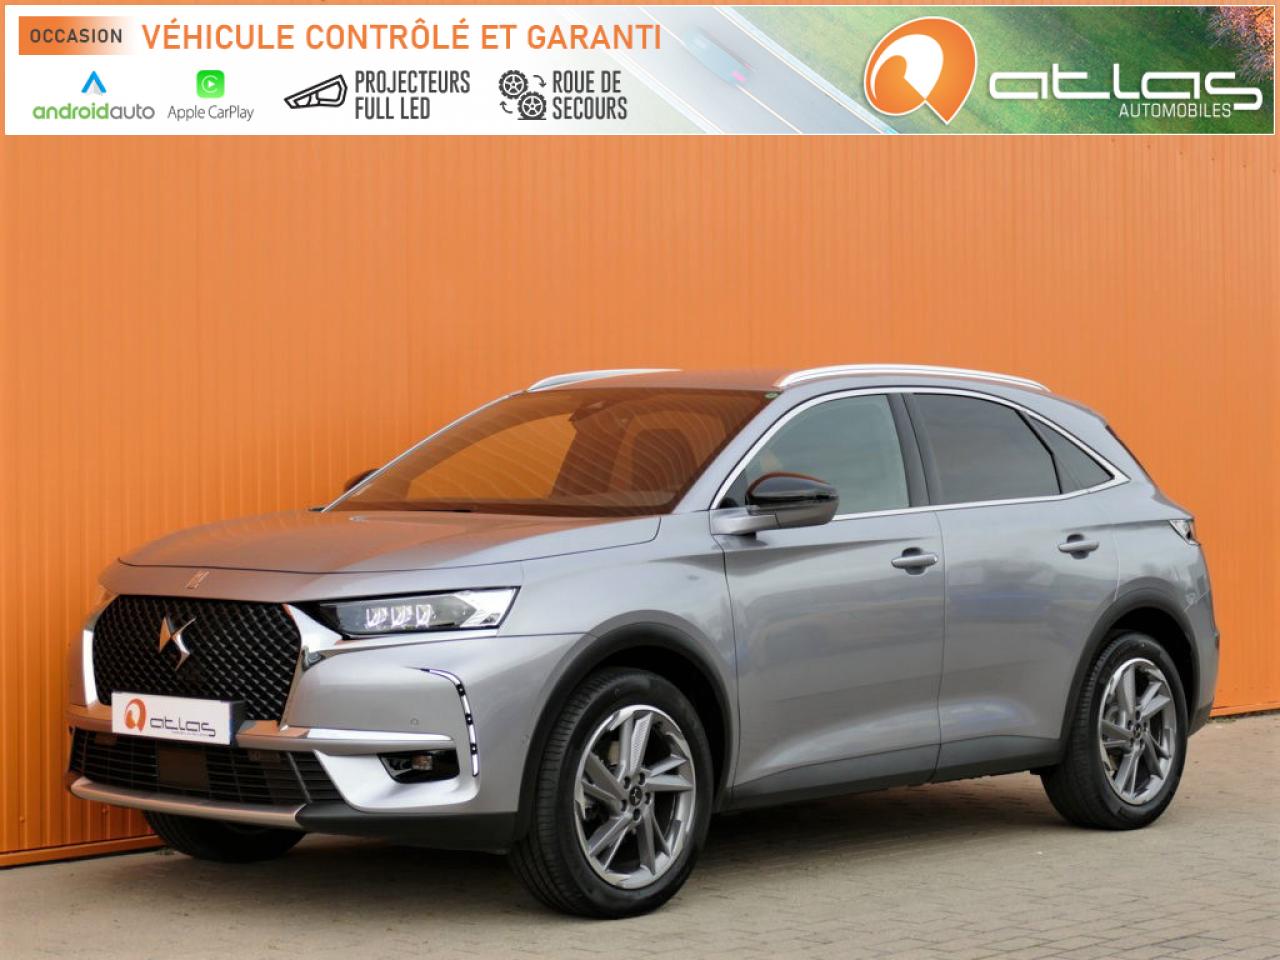 2020 Ds DS7 CROSSBACK